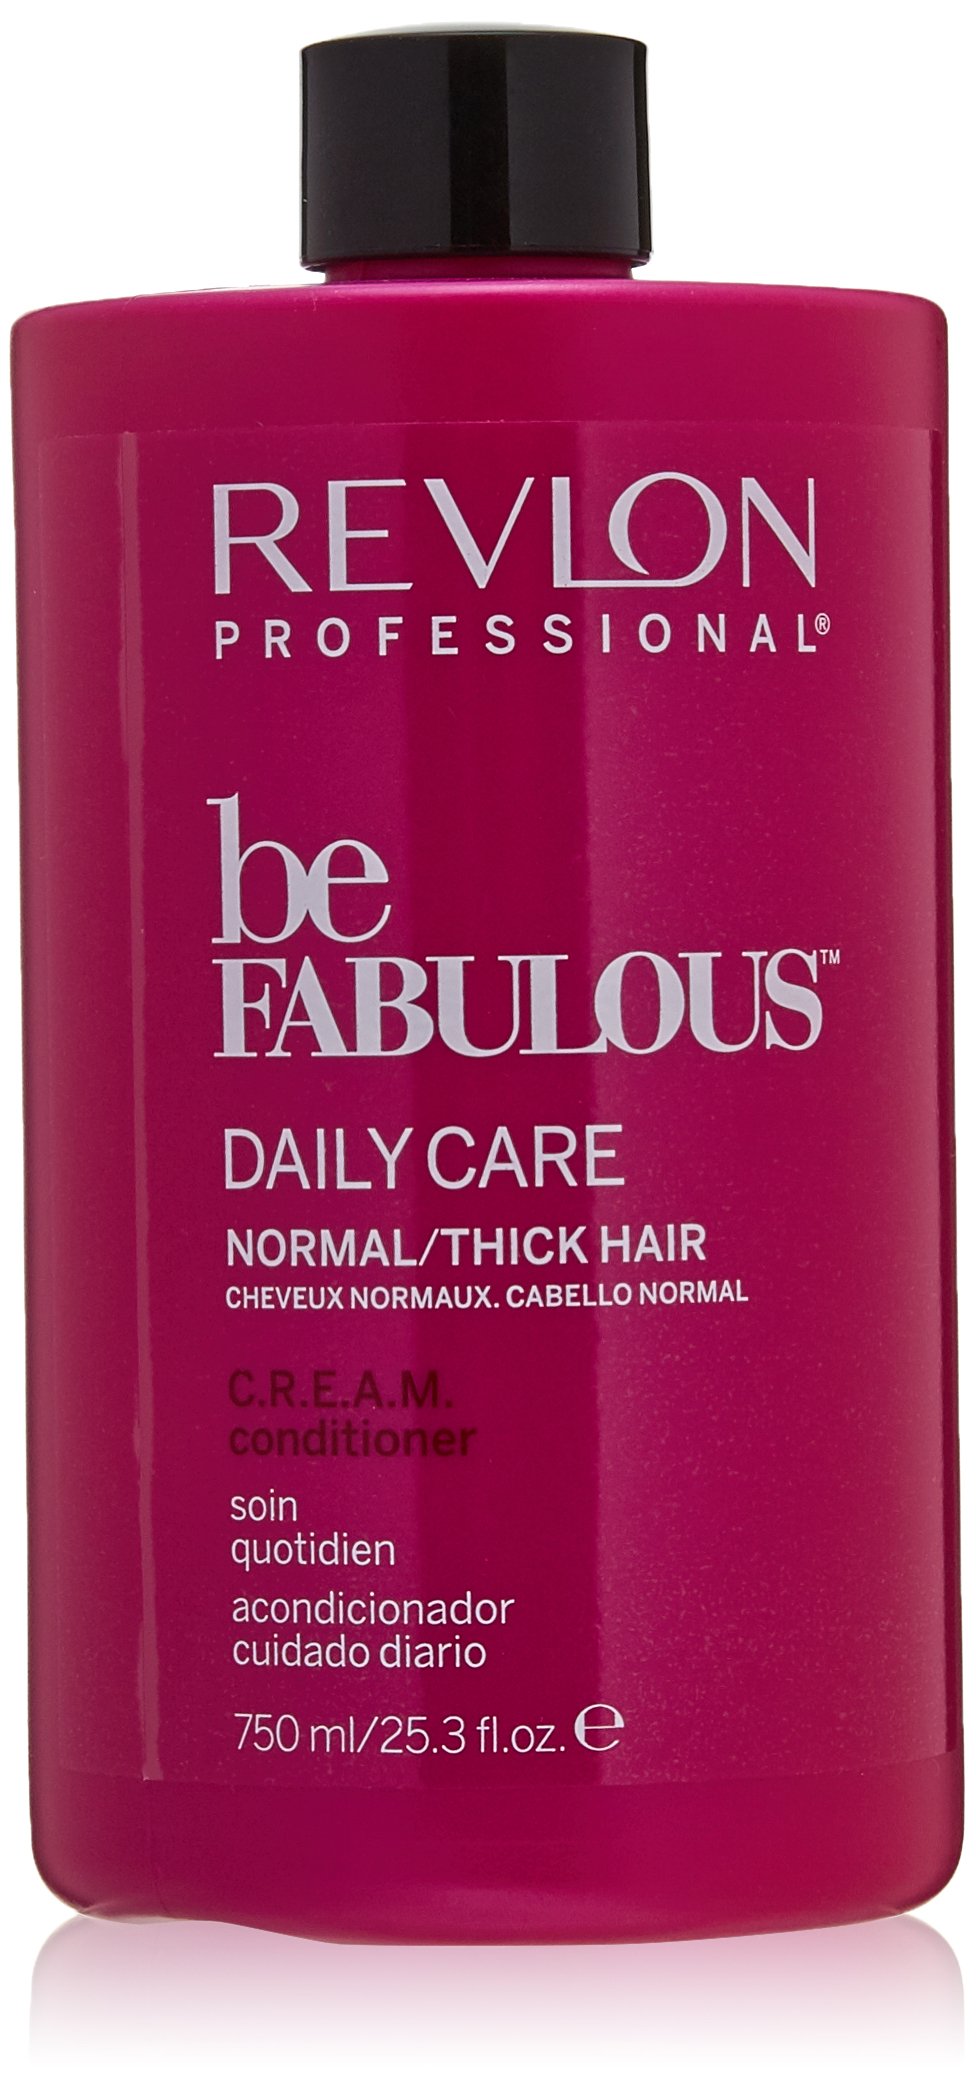 REVLON PROFESSIONAL Be Fabulous Daily Care C.R.E.A.M. Conditioner, 1er Pack (1 x 750 ml)